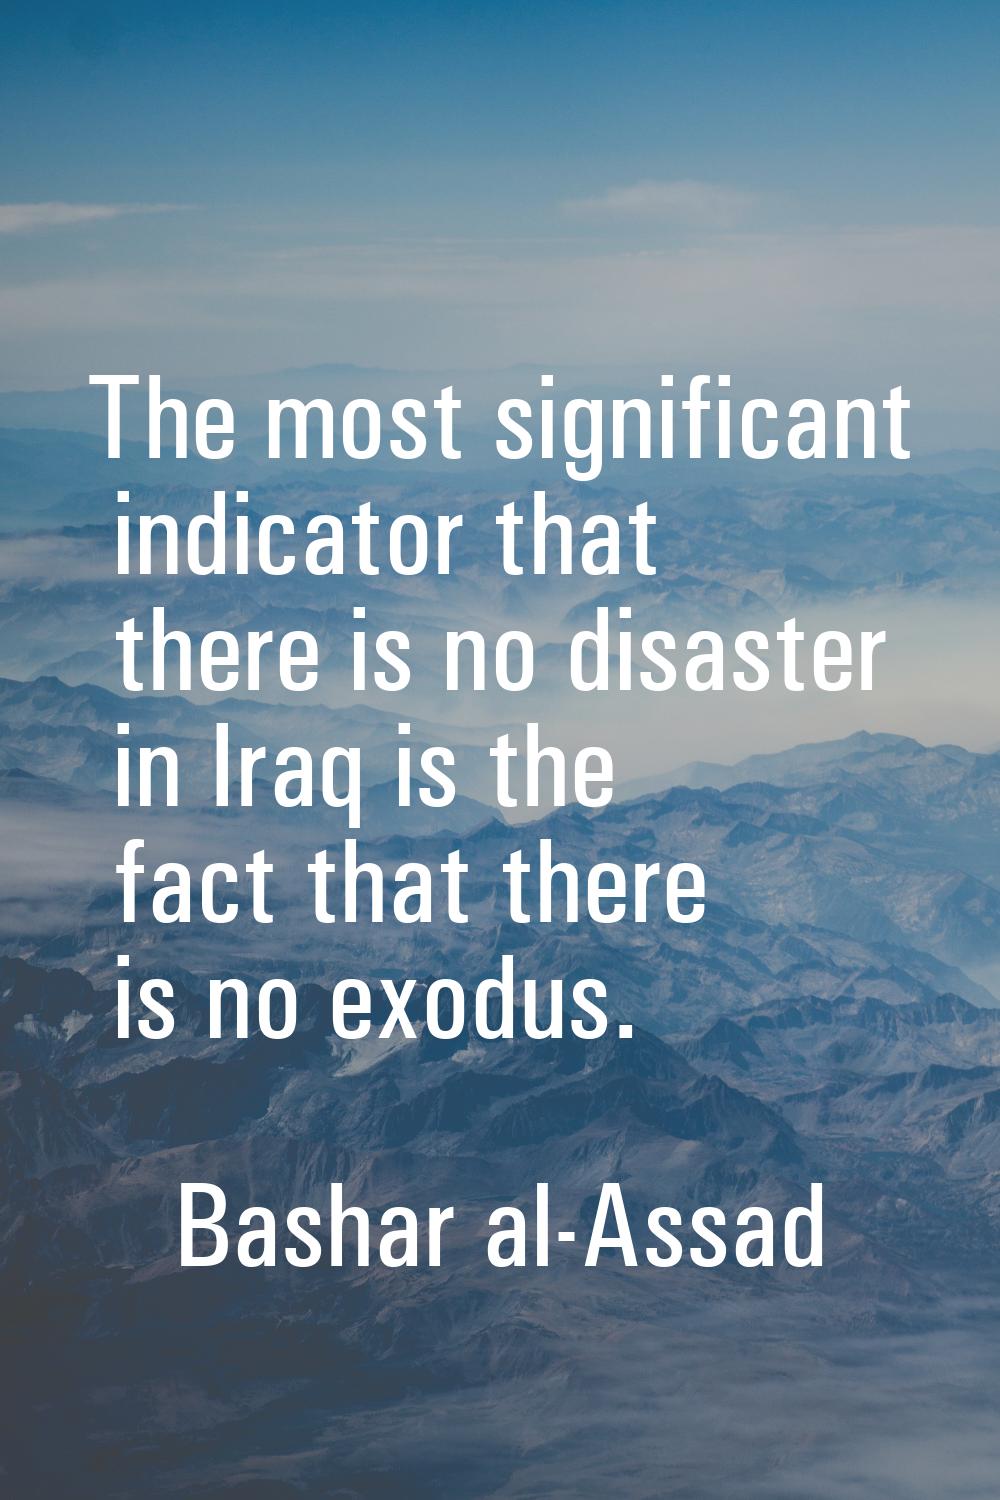 The most significant indicator that there is no disaster in Iraq is the fact that there is no exodu